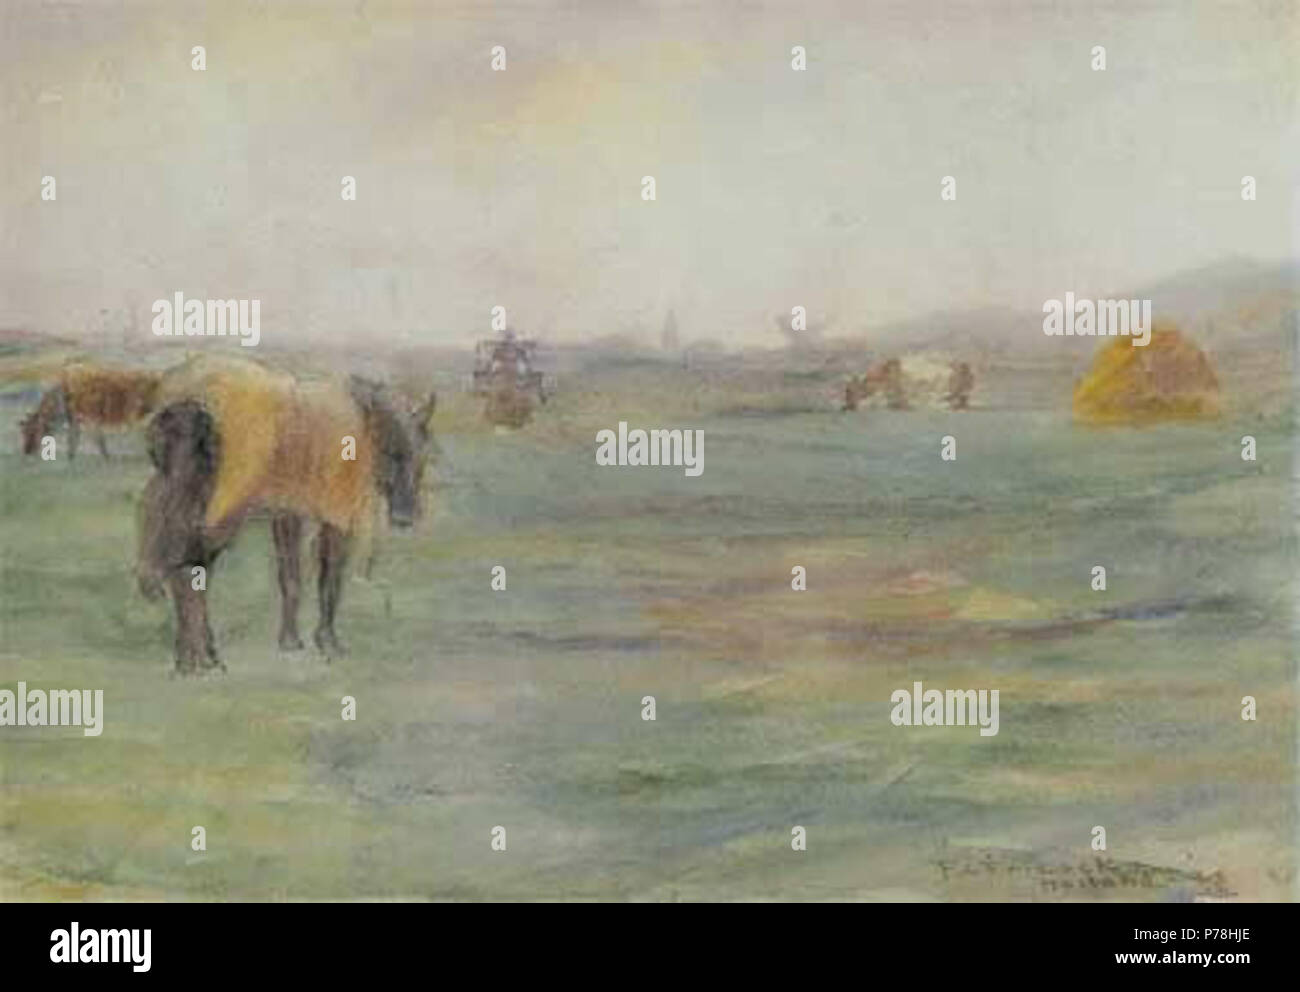 English: Horse in a Field (Holland), 1898, Watercolor on paper, 9 1/2 x 13 1/2 inches . 1898 13 Frieseke Horse in a Field (Holland) Stock Photo